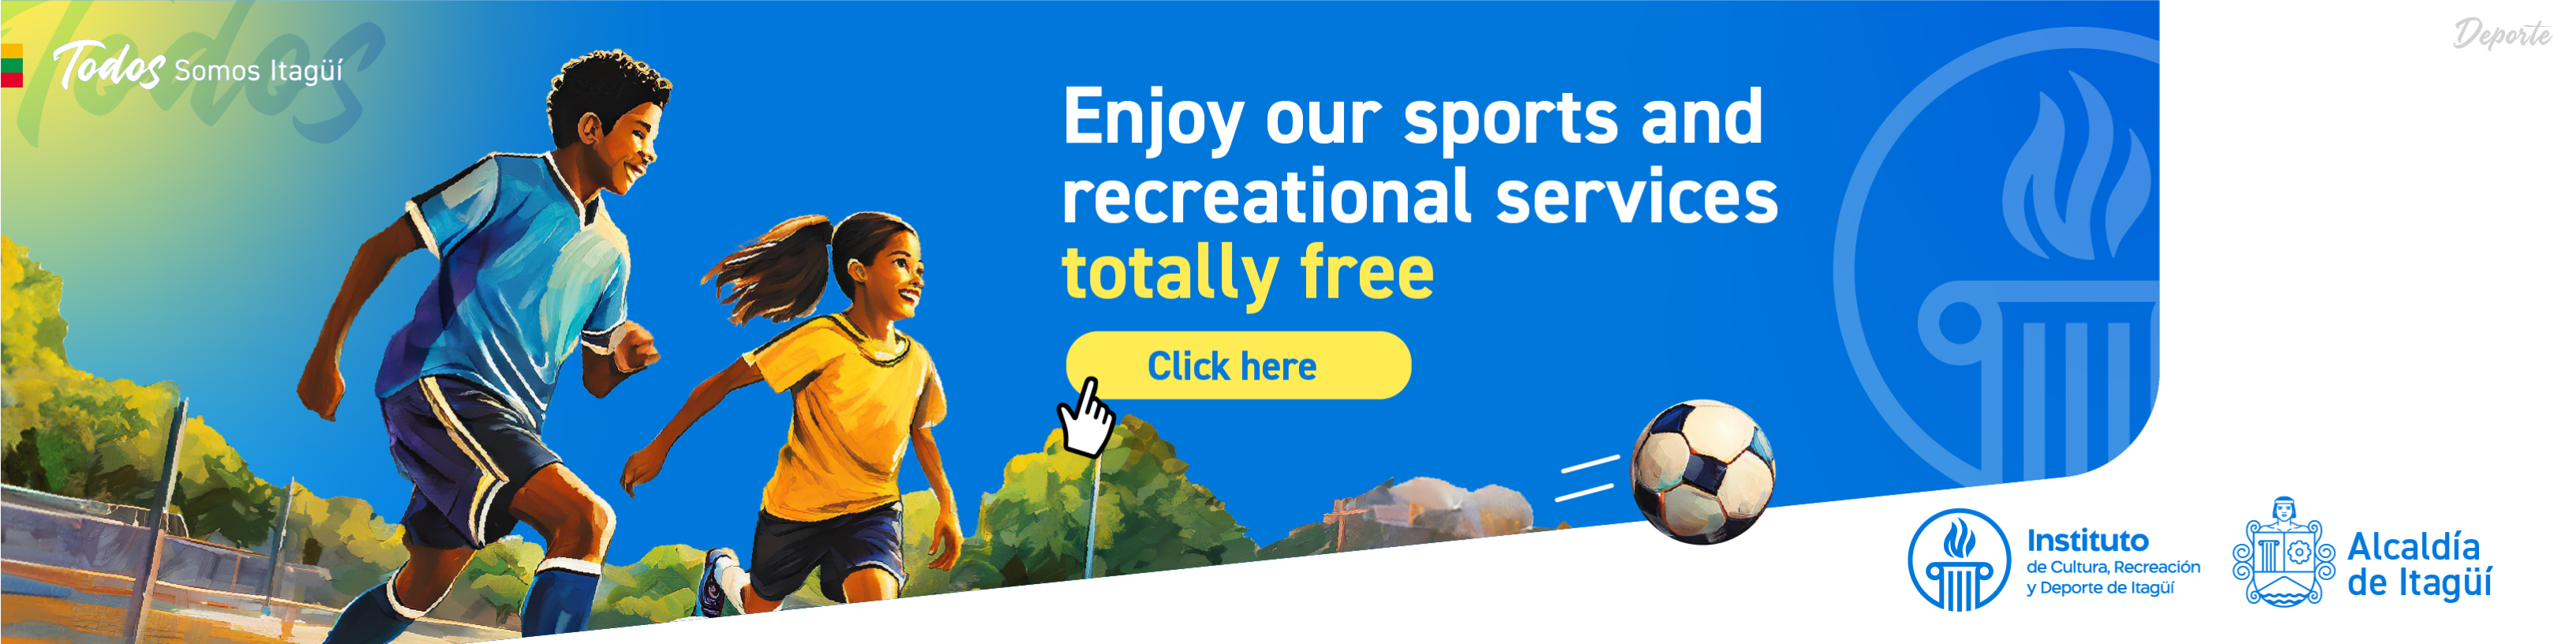 Enjoy our sports and recreational services totally free
Click here